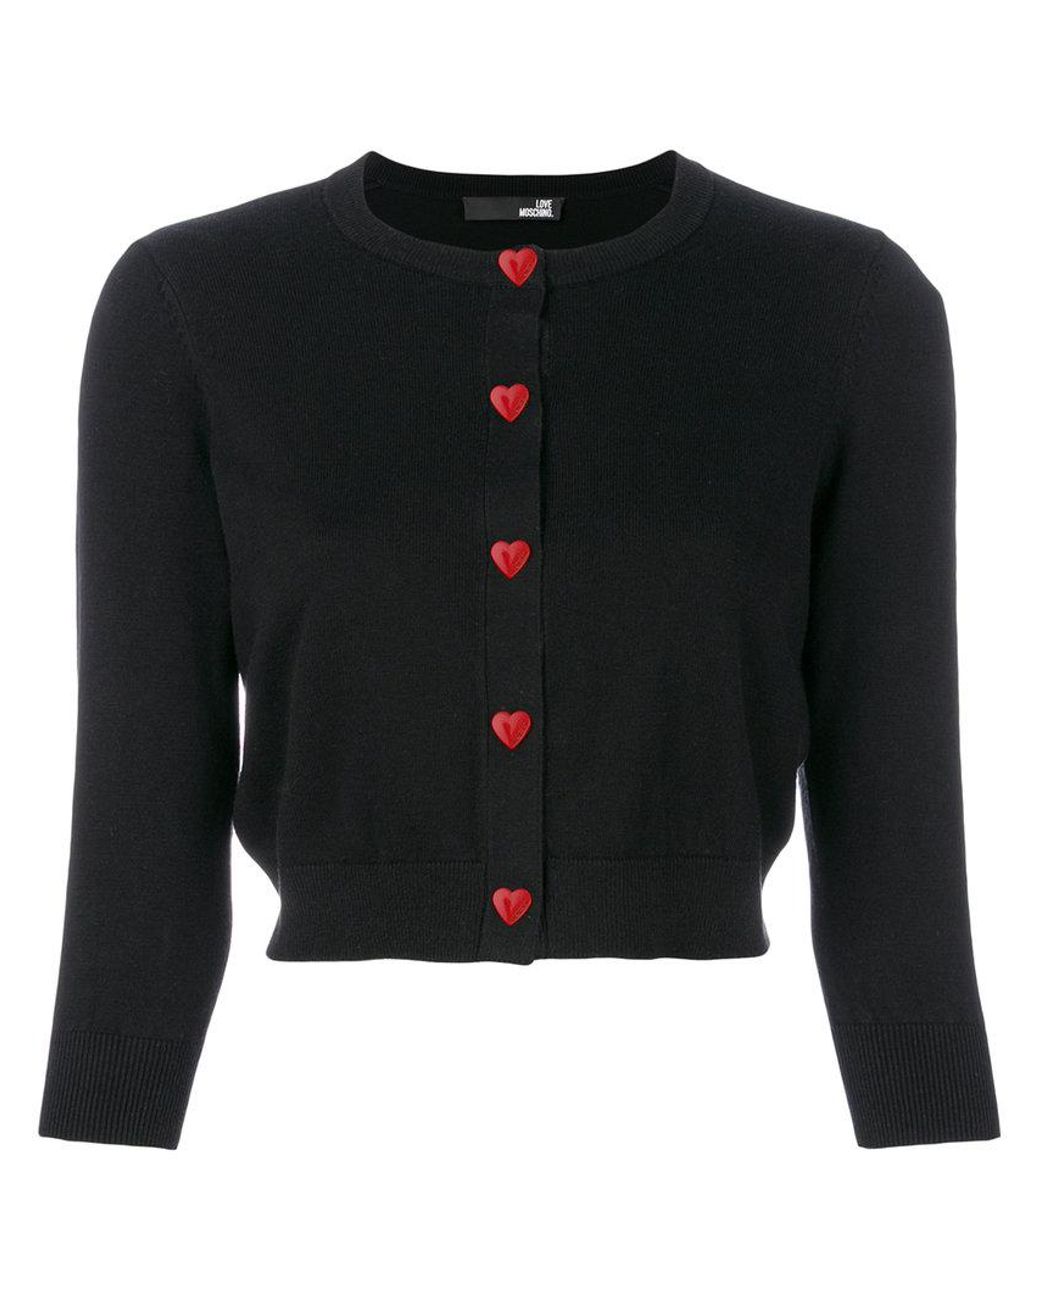 Love Moschino Heart Buttons Cardigan in Black | Lyst